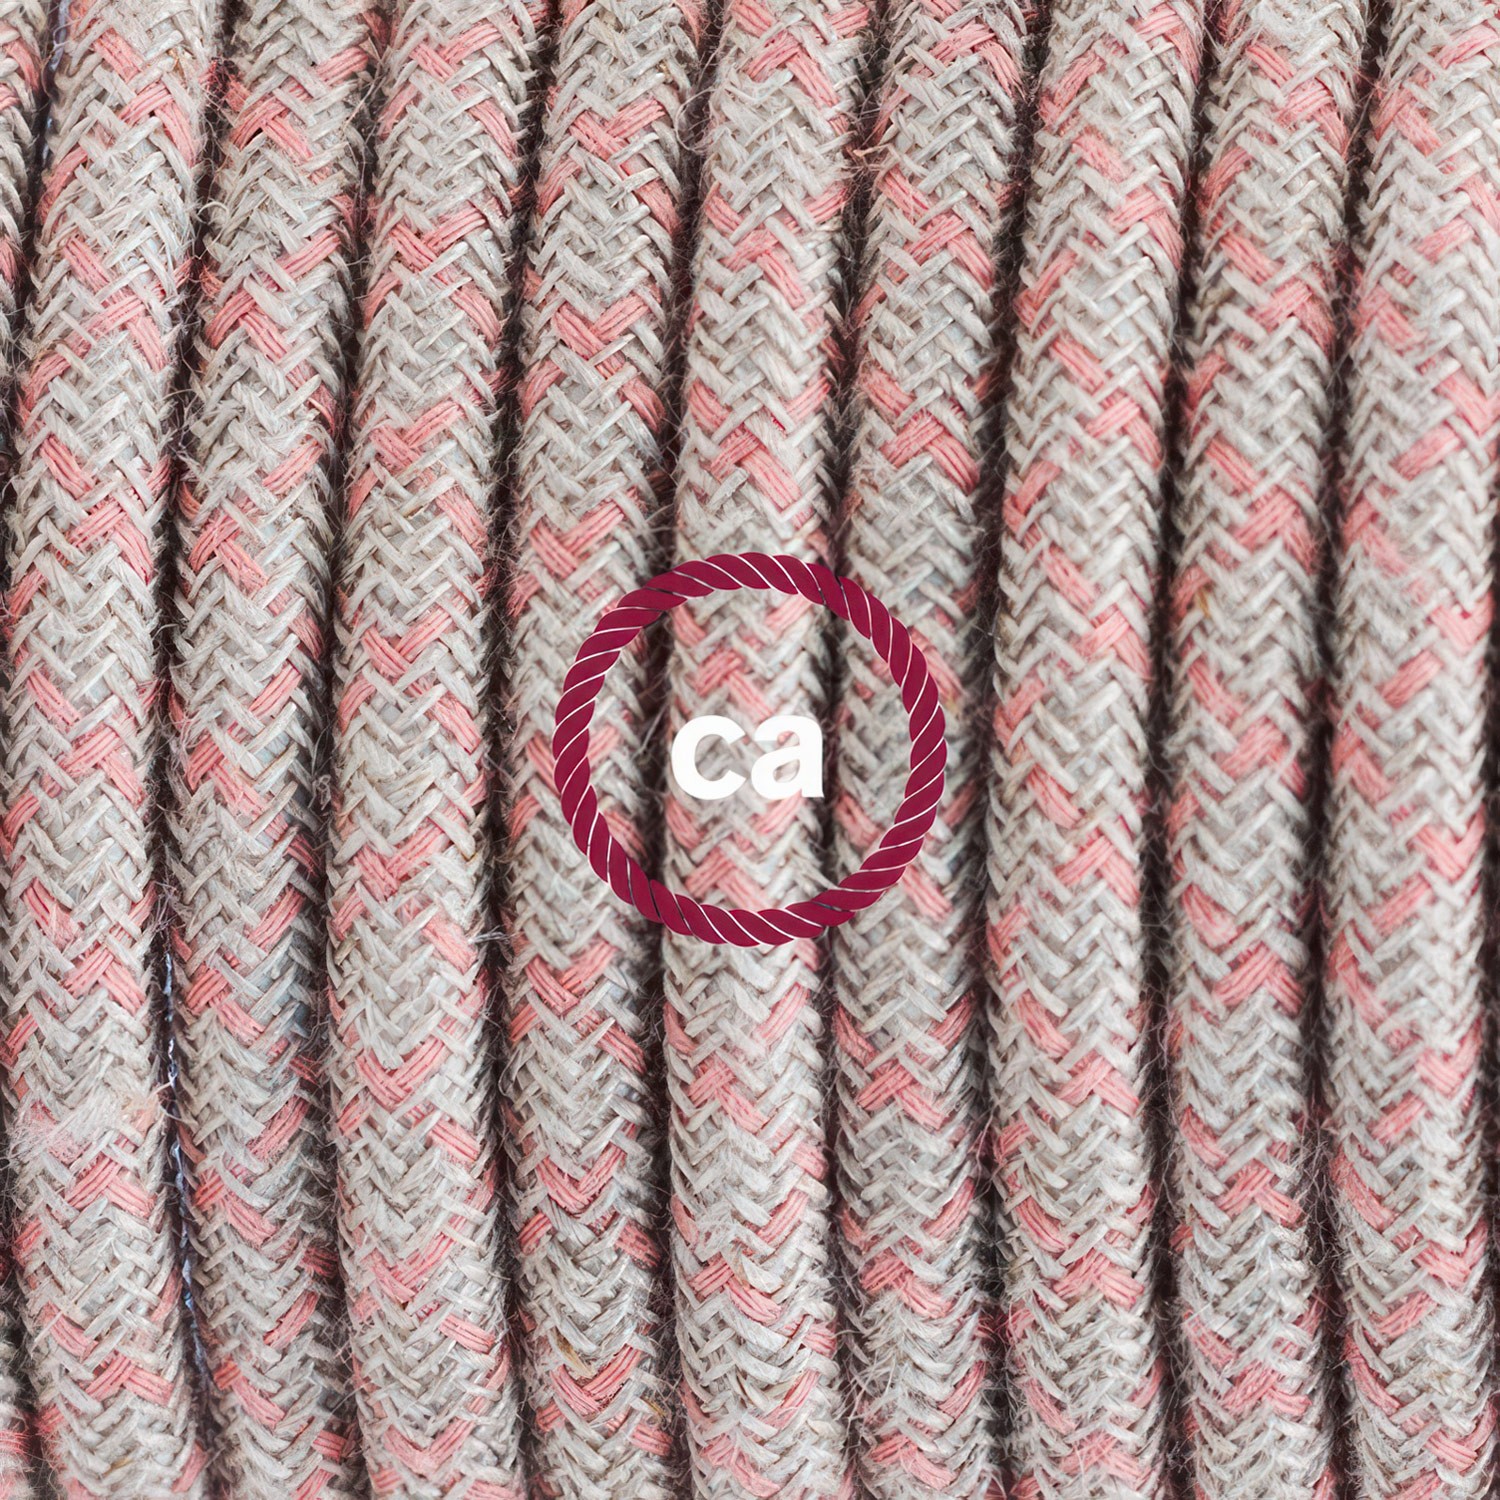 Wiring Pedestal, RD61 Ancient Pink Diamond Cotton and Natural Linen 3 m. Choose the colour of the switch and plug.